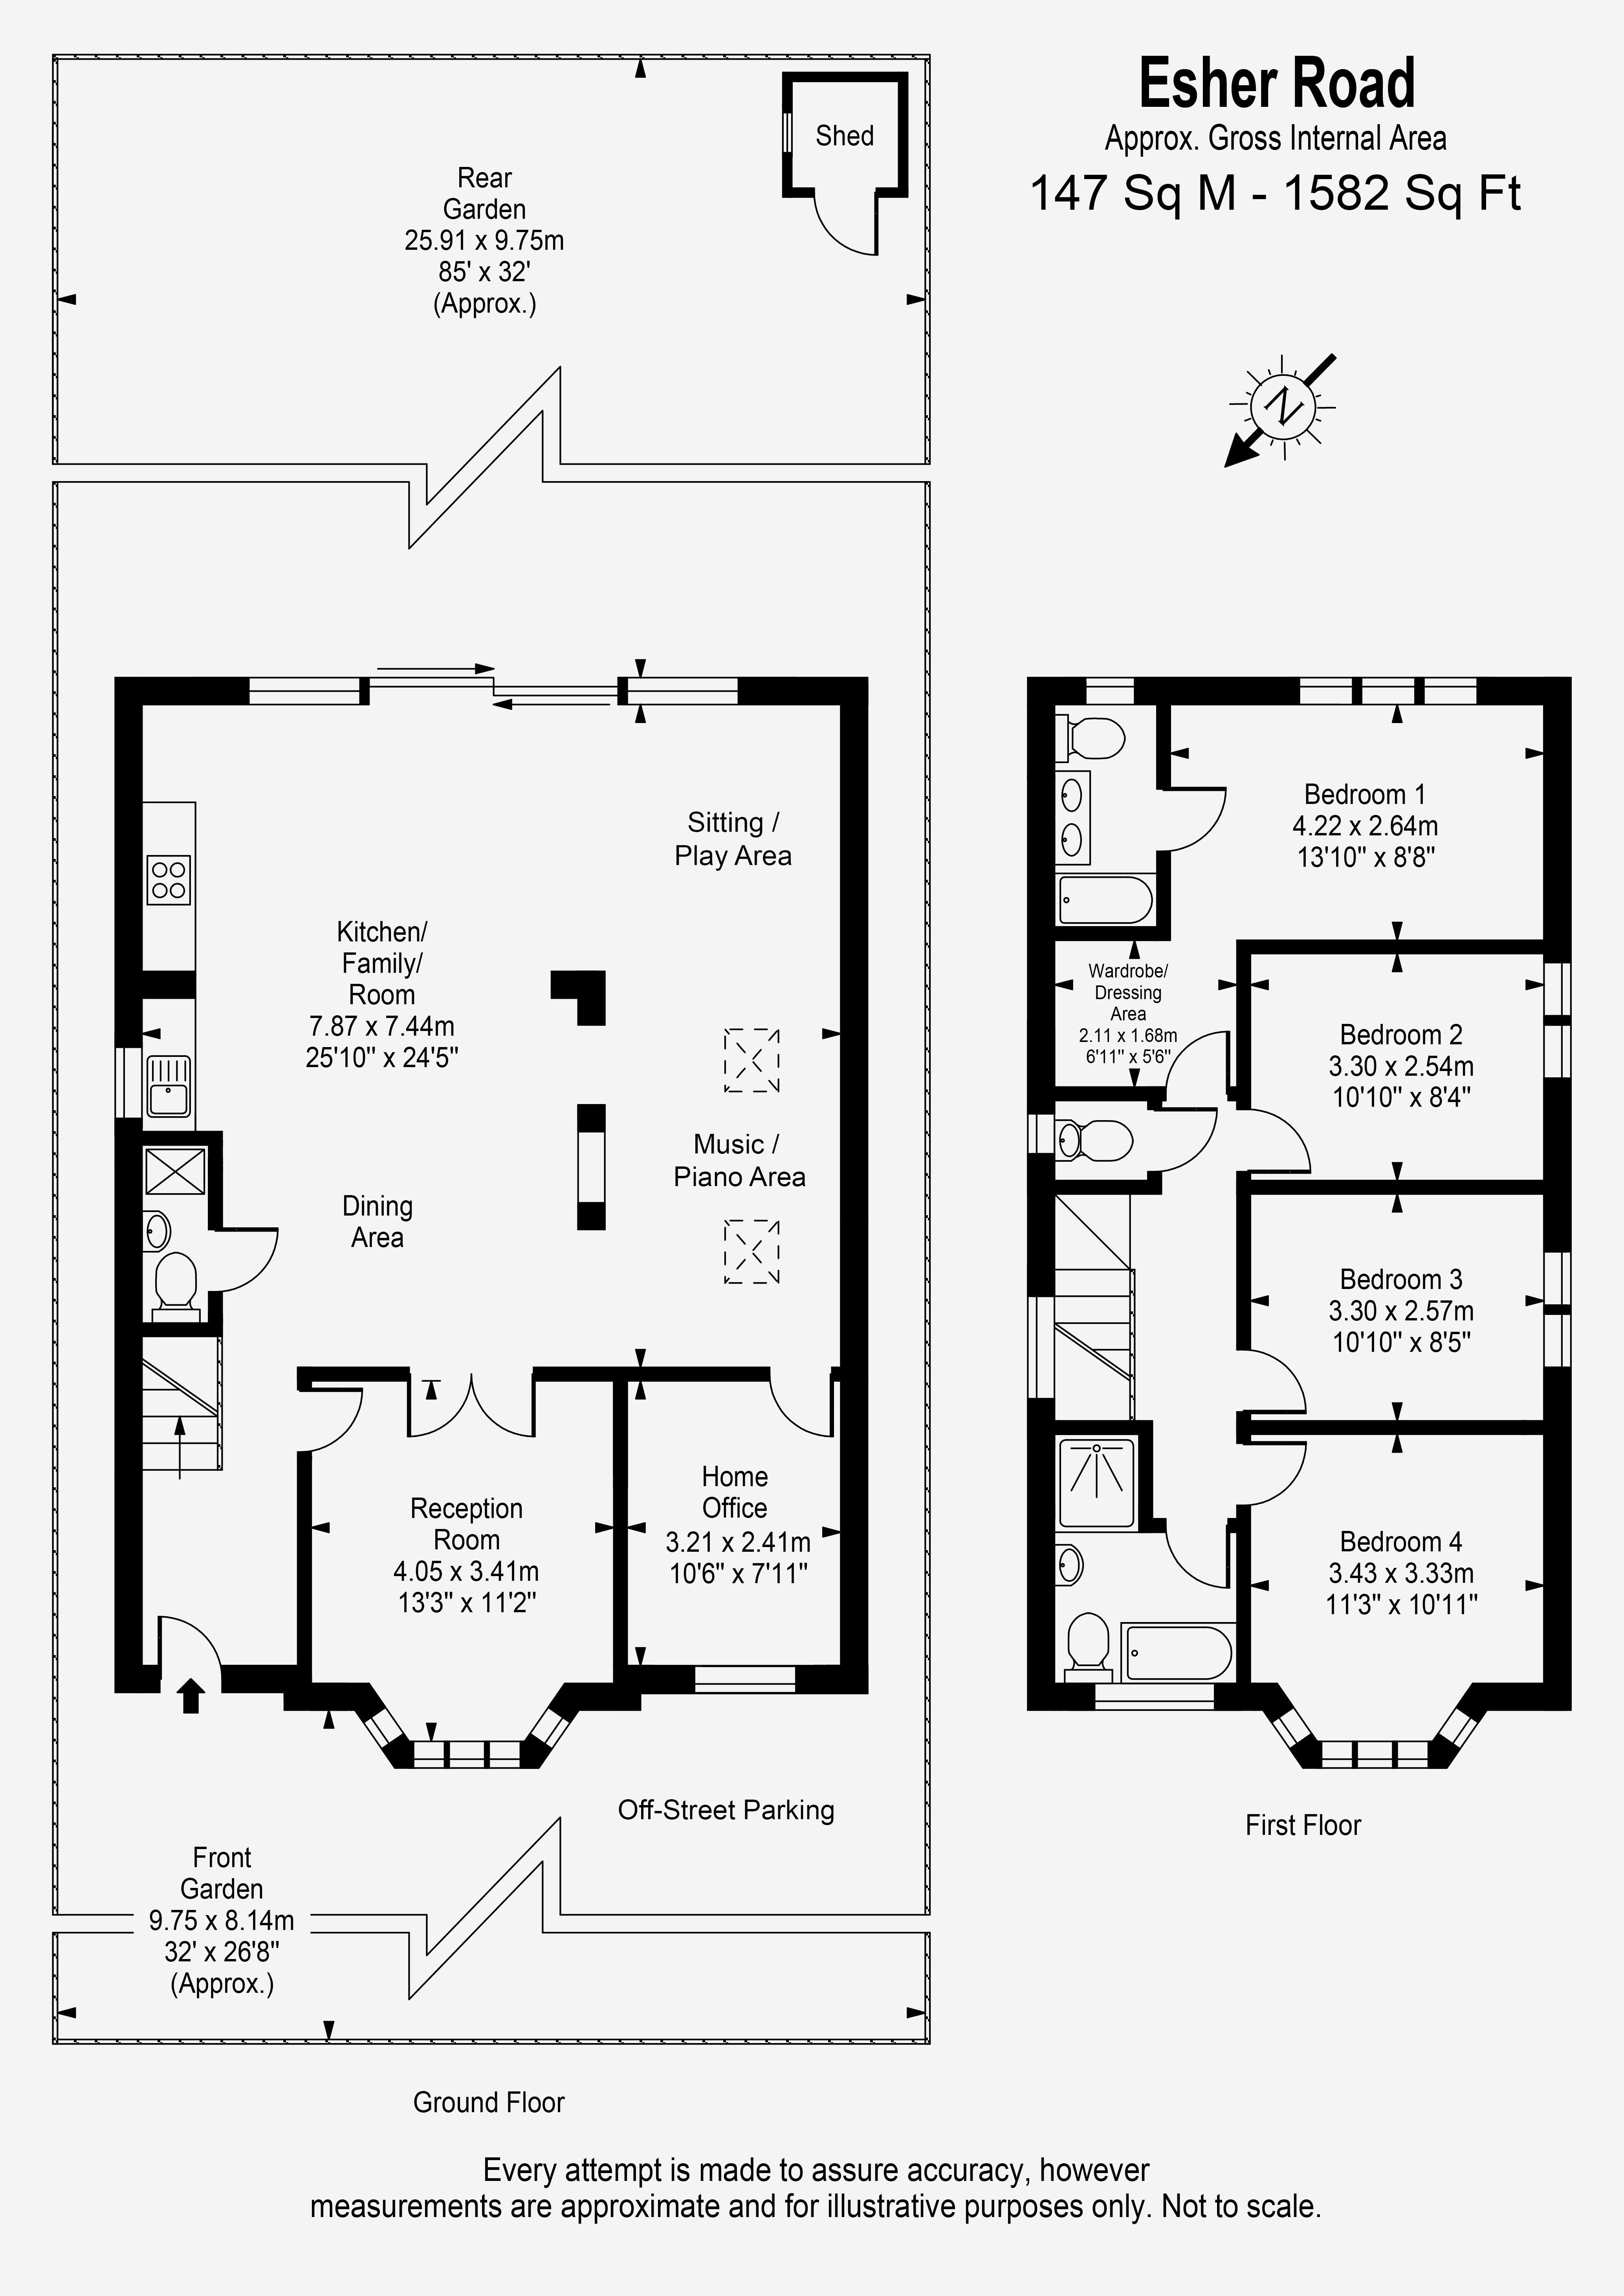 Floorplans For Esher Road, East Molesey